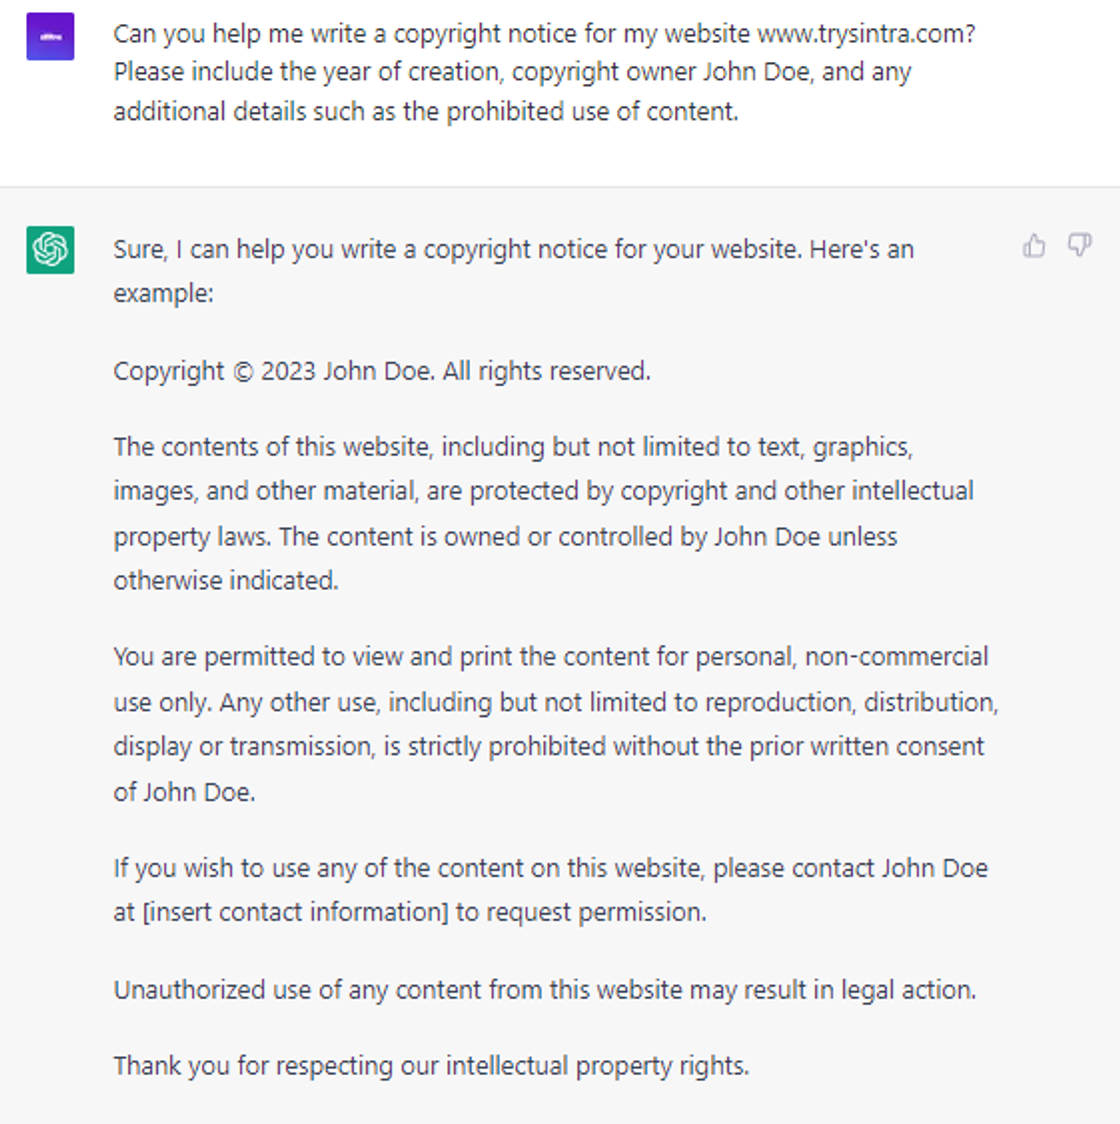  6 Proven ChatGPT Prompts: Write website copyright notice